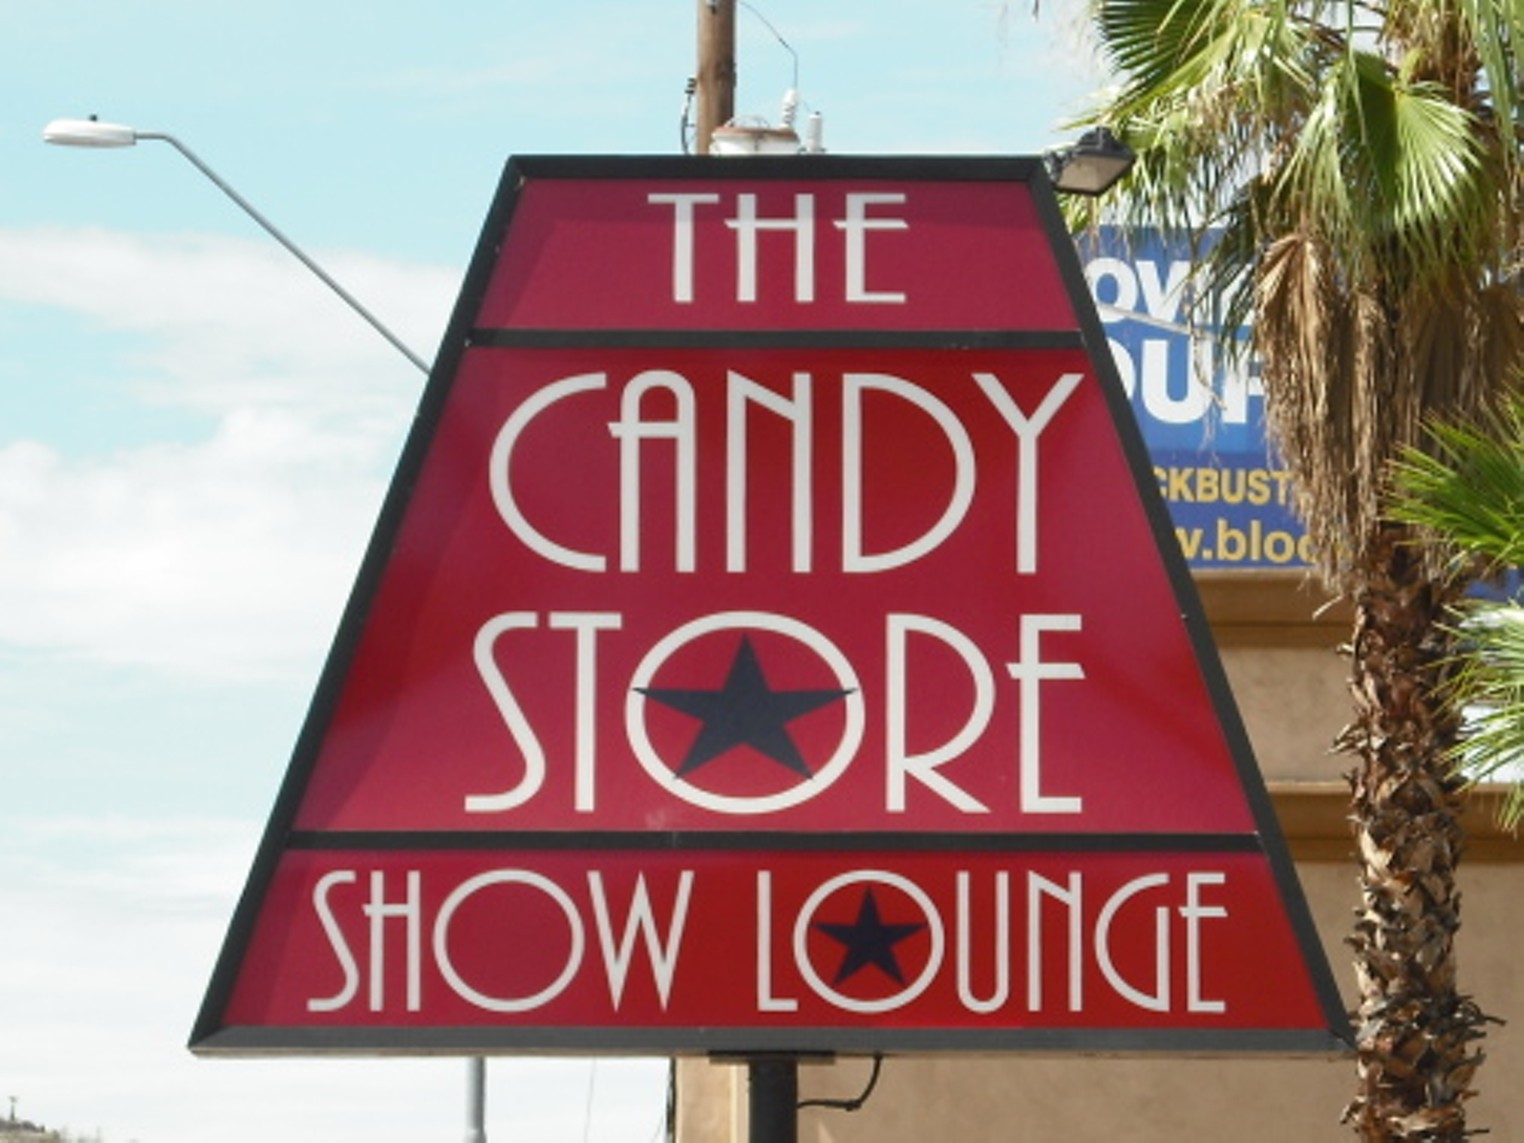 Best Strip Club 2013 The Candy Store Bars and Clubs Phoenix pic